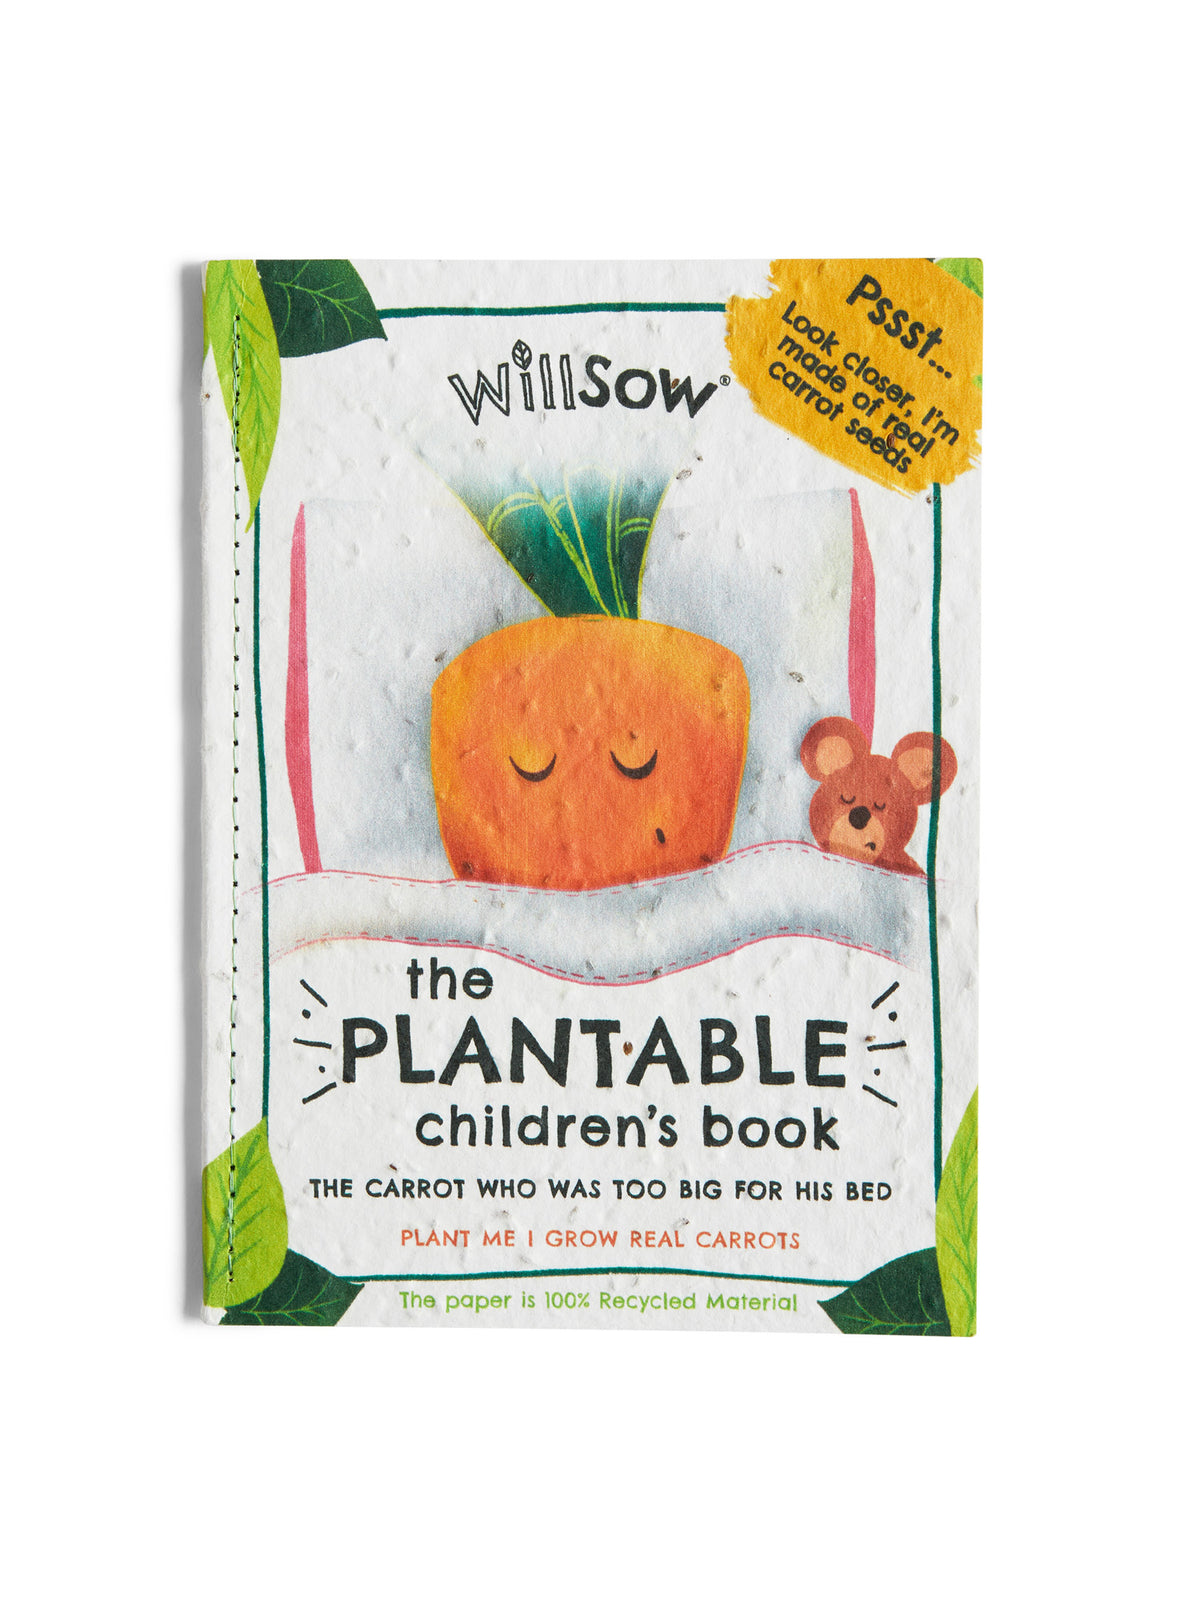 Willsow Plantable Book - The Carrot Who Was Too Big For His Bed